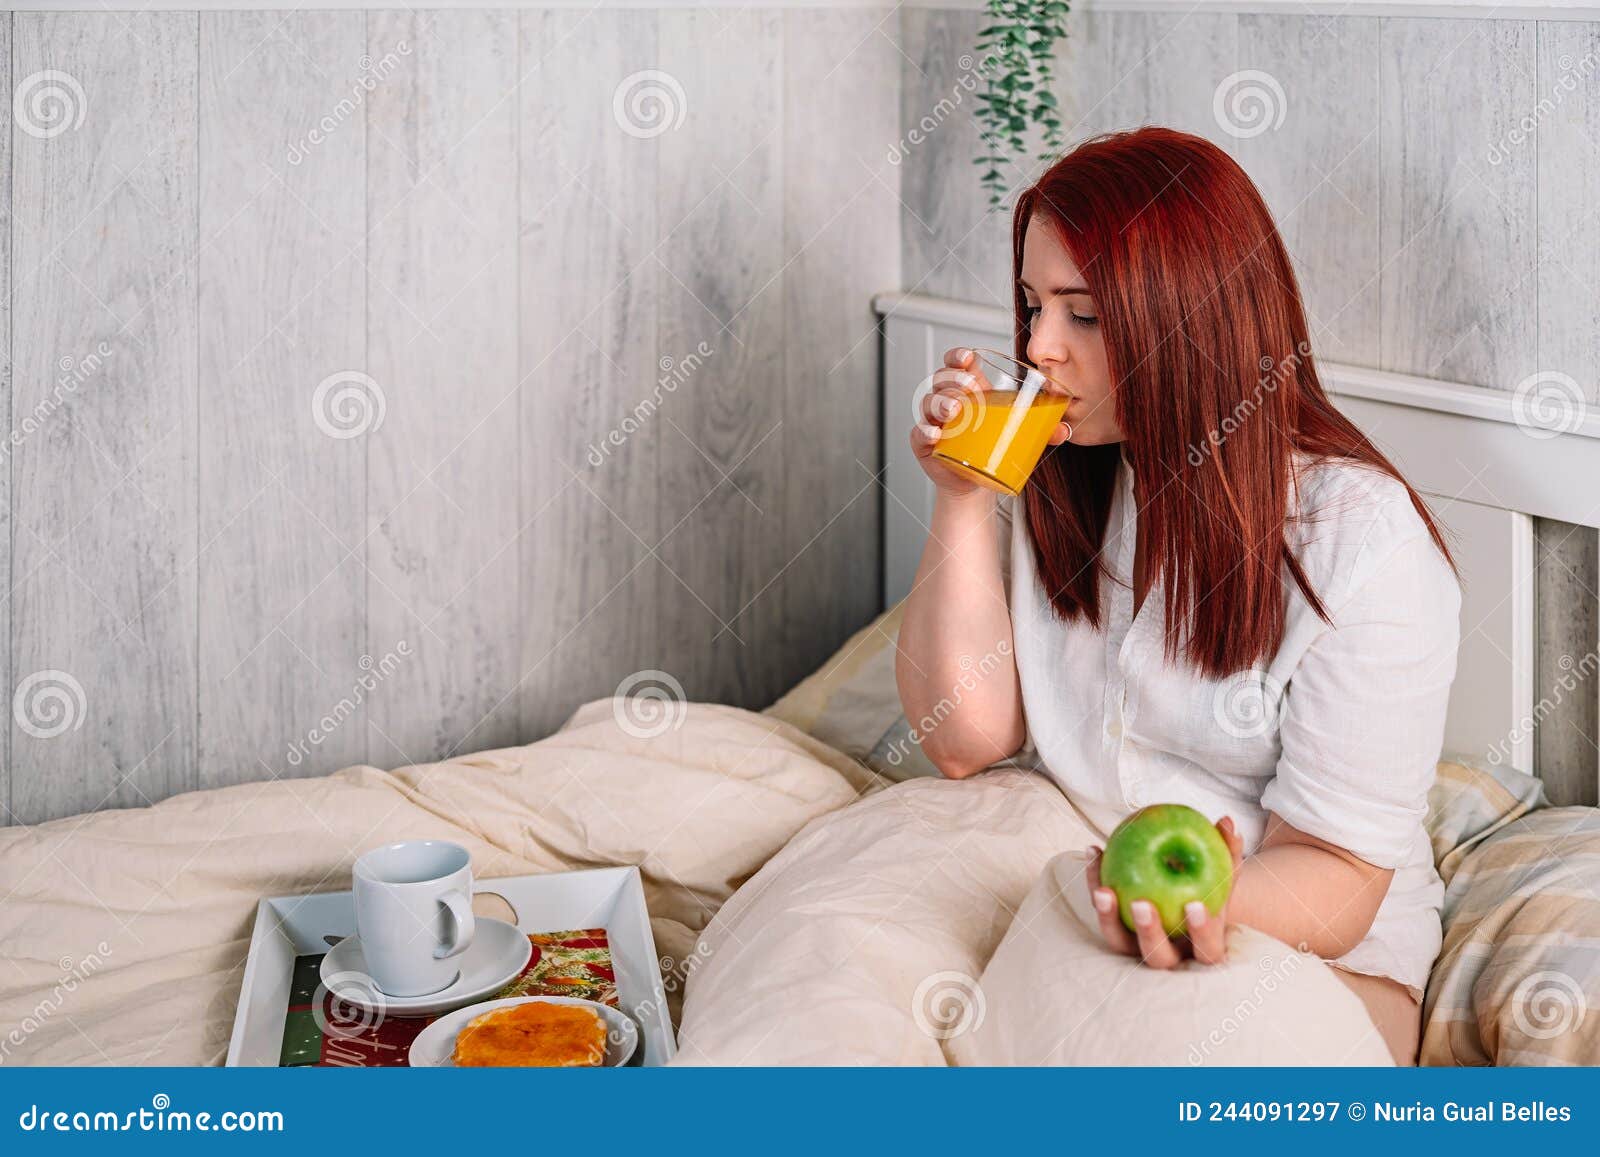 180 Sexy Girl Drinking Orange Juice Photos Free Royalty Free Stock Photos From Dreamstime